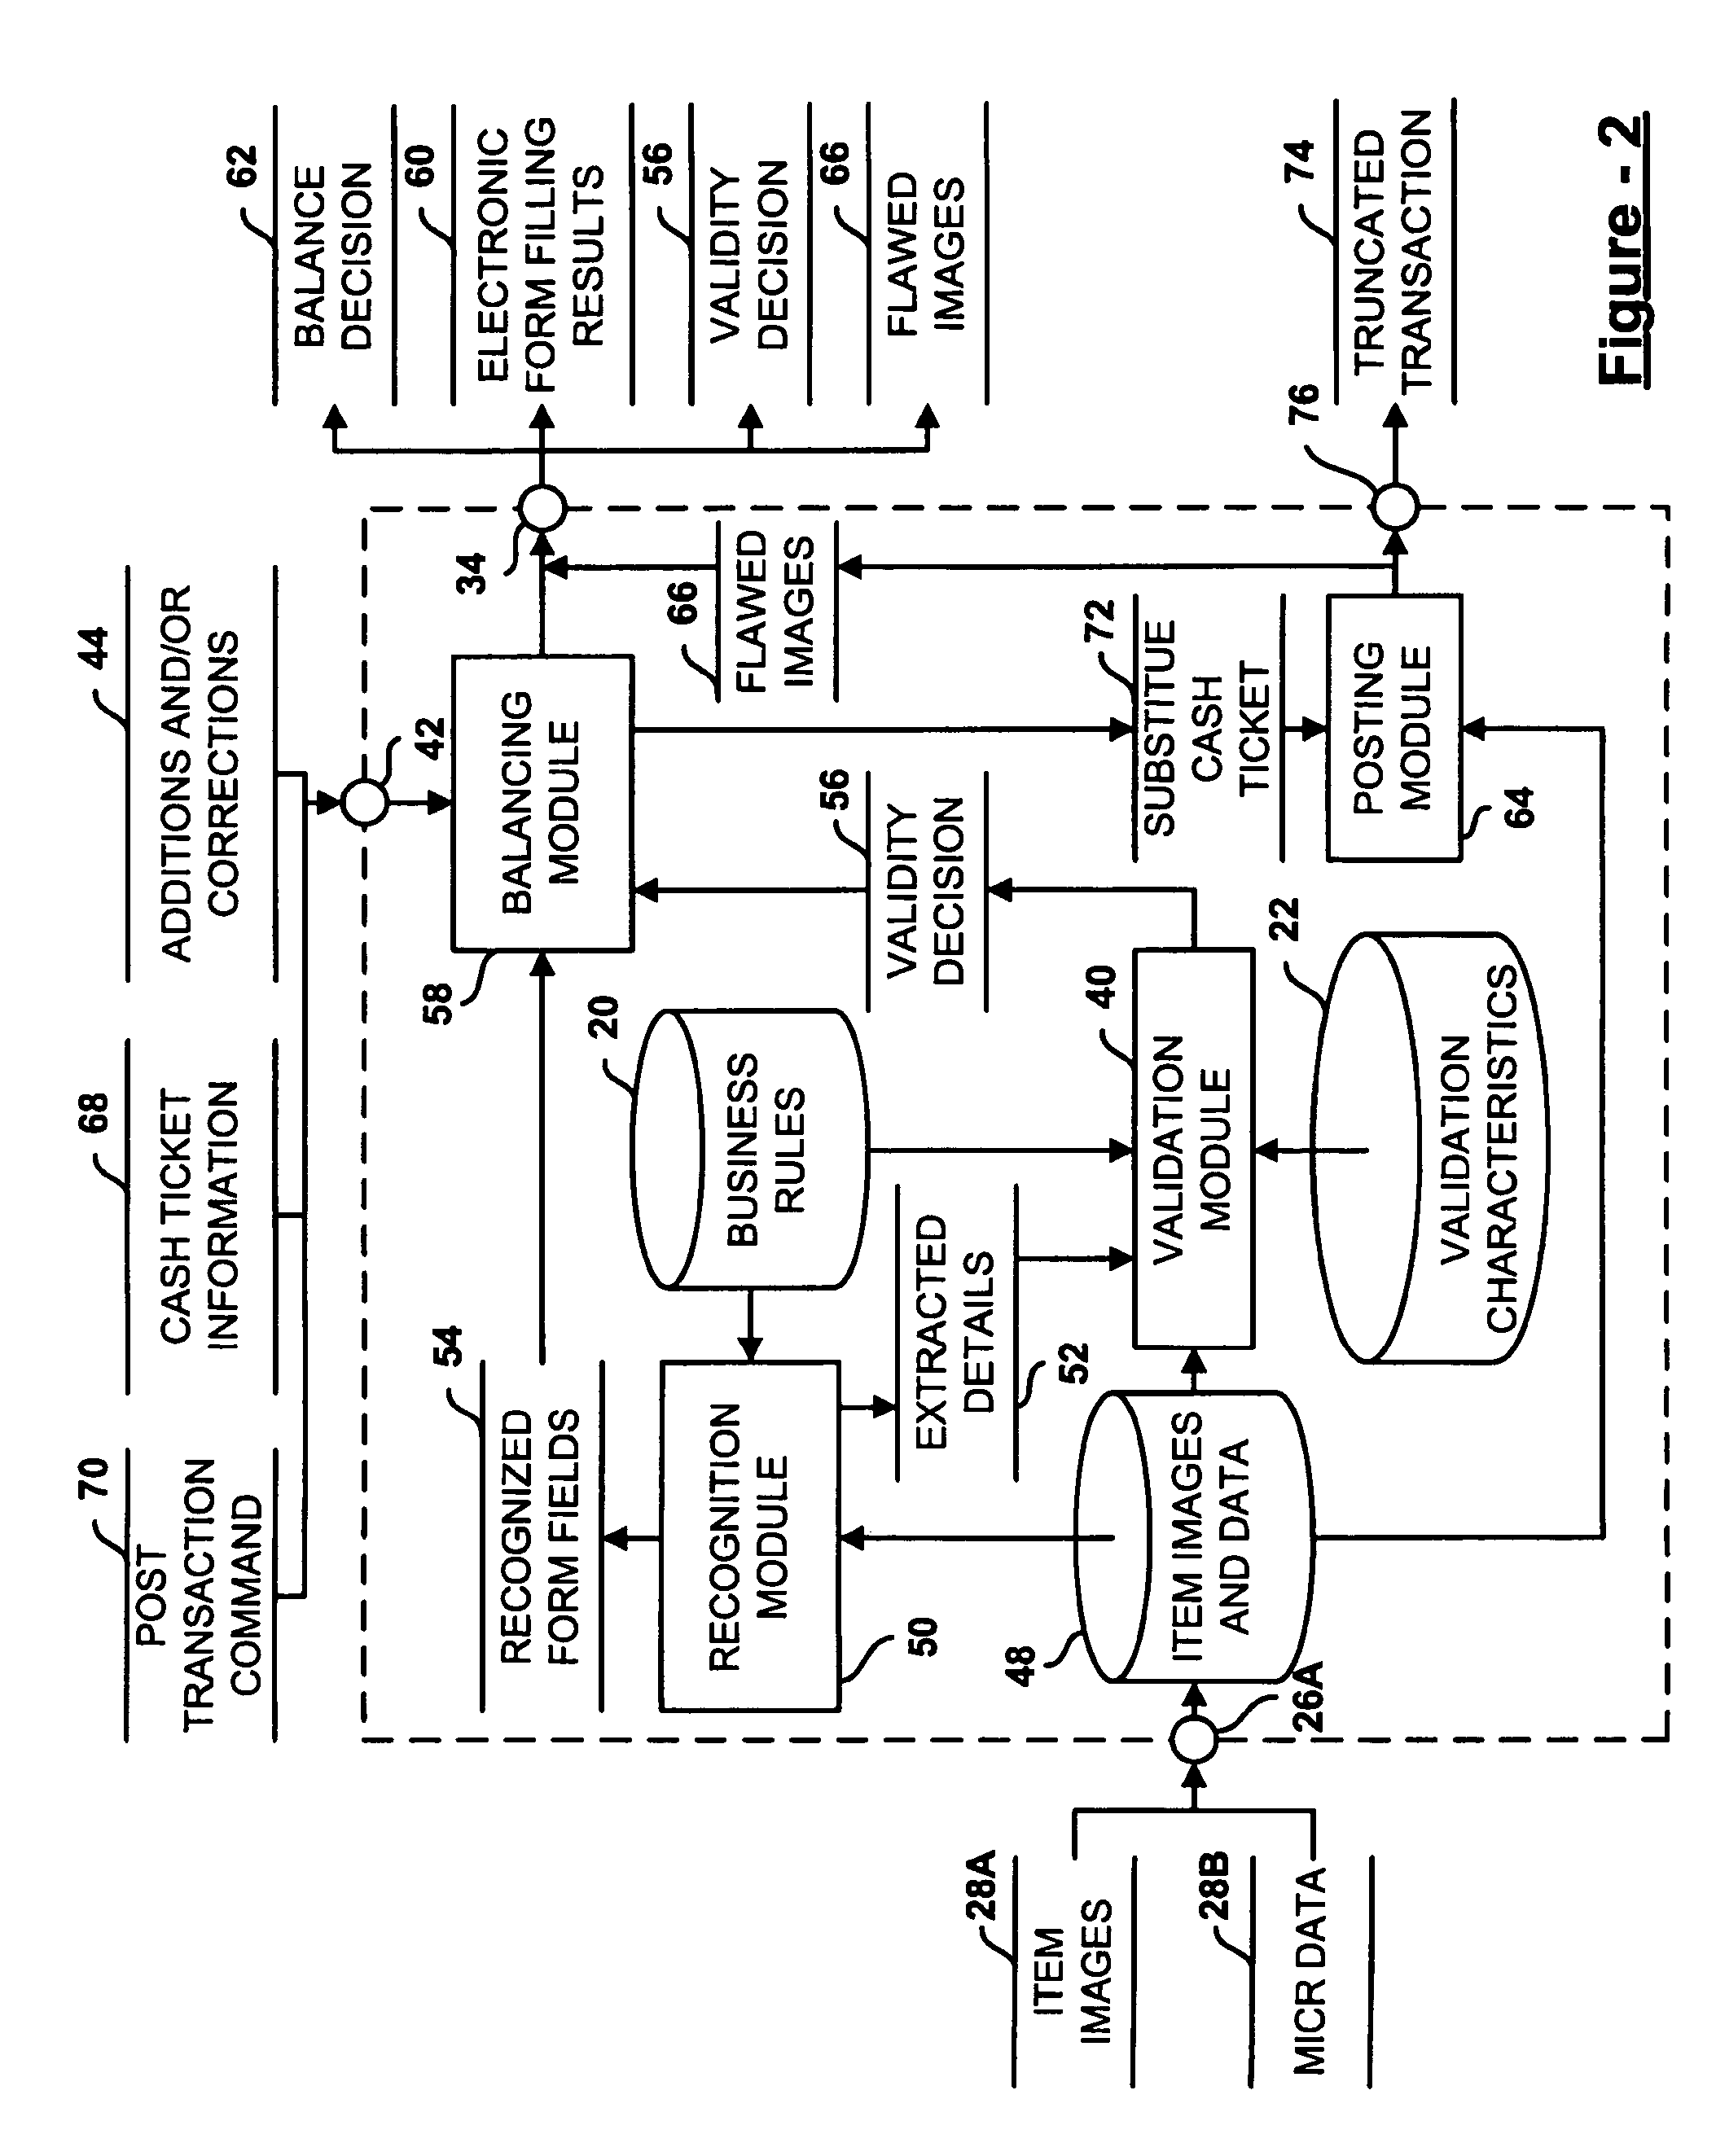 Image-enabled item processing for point of presentment application